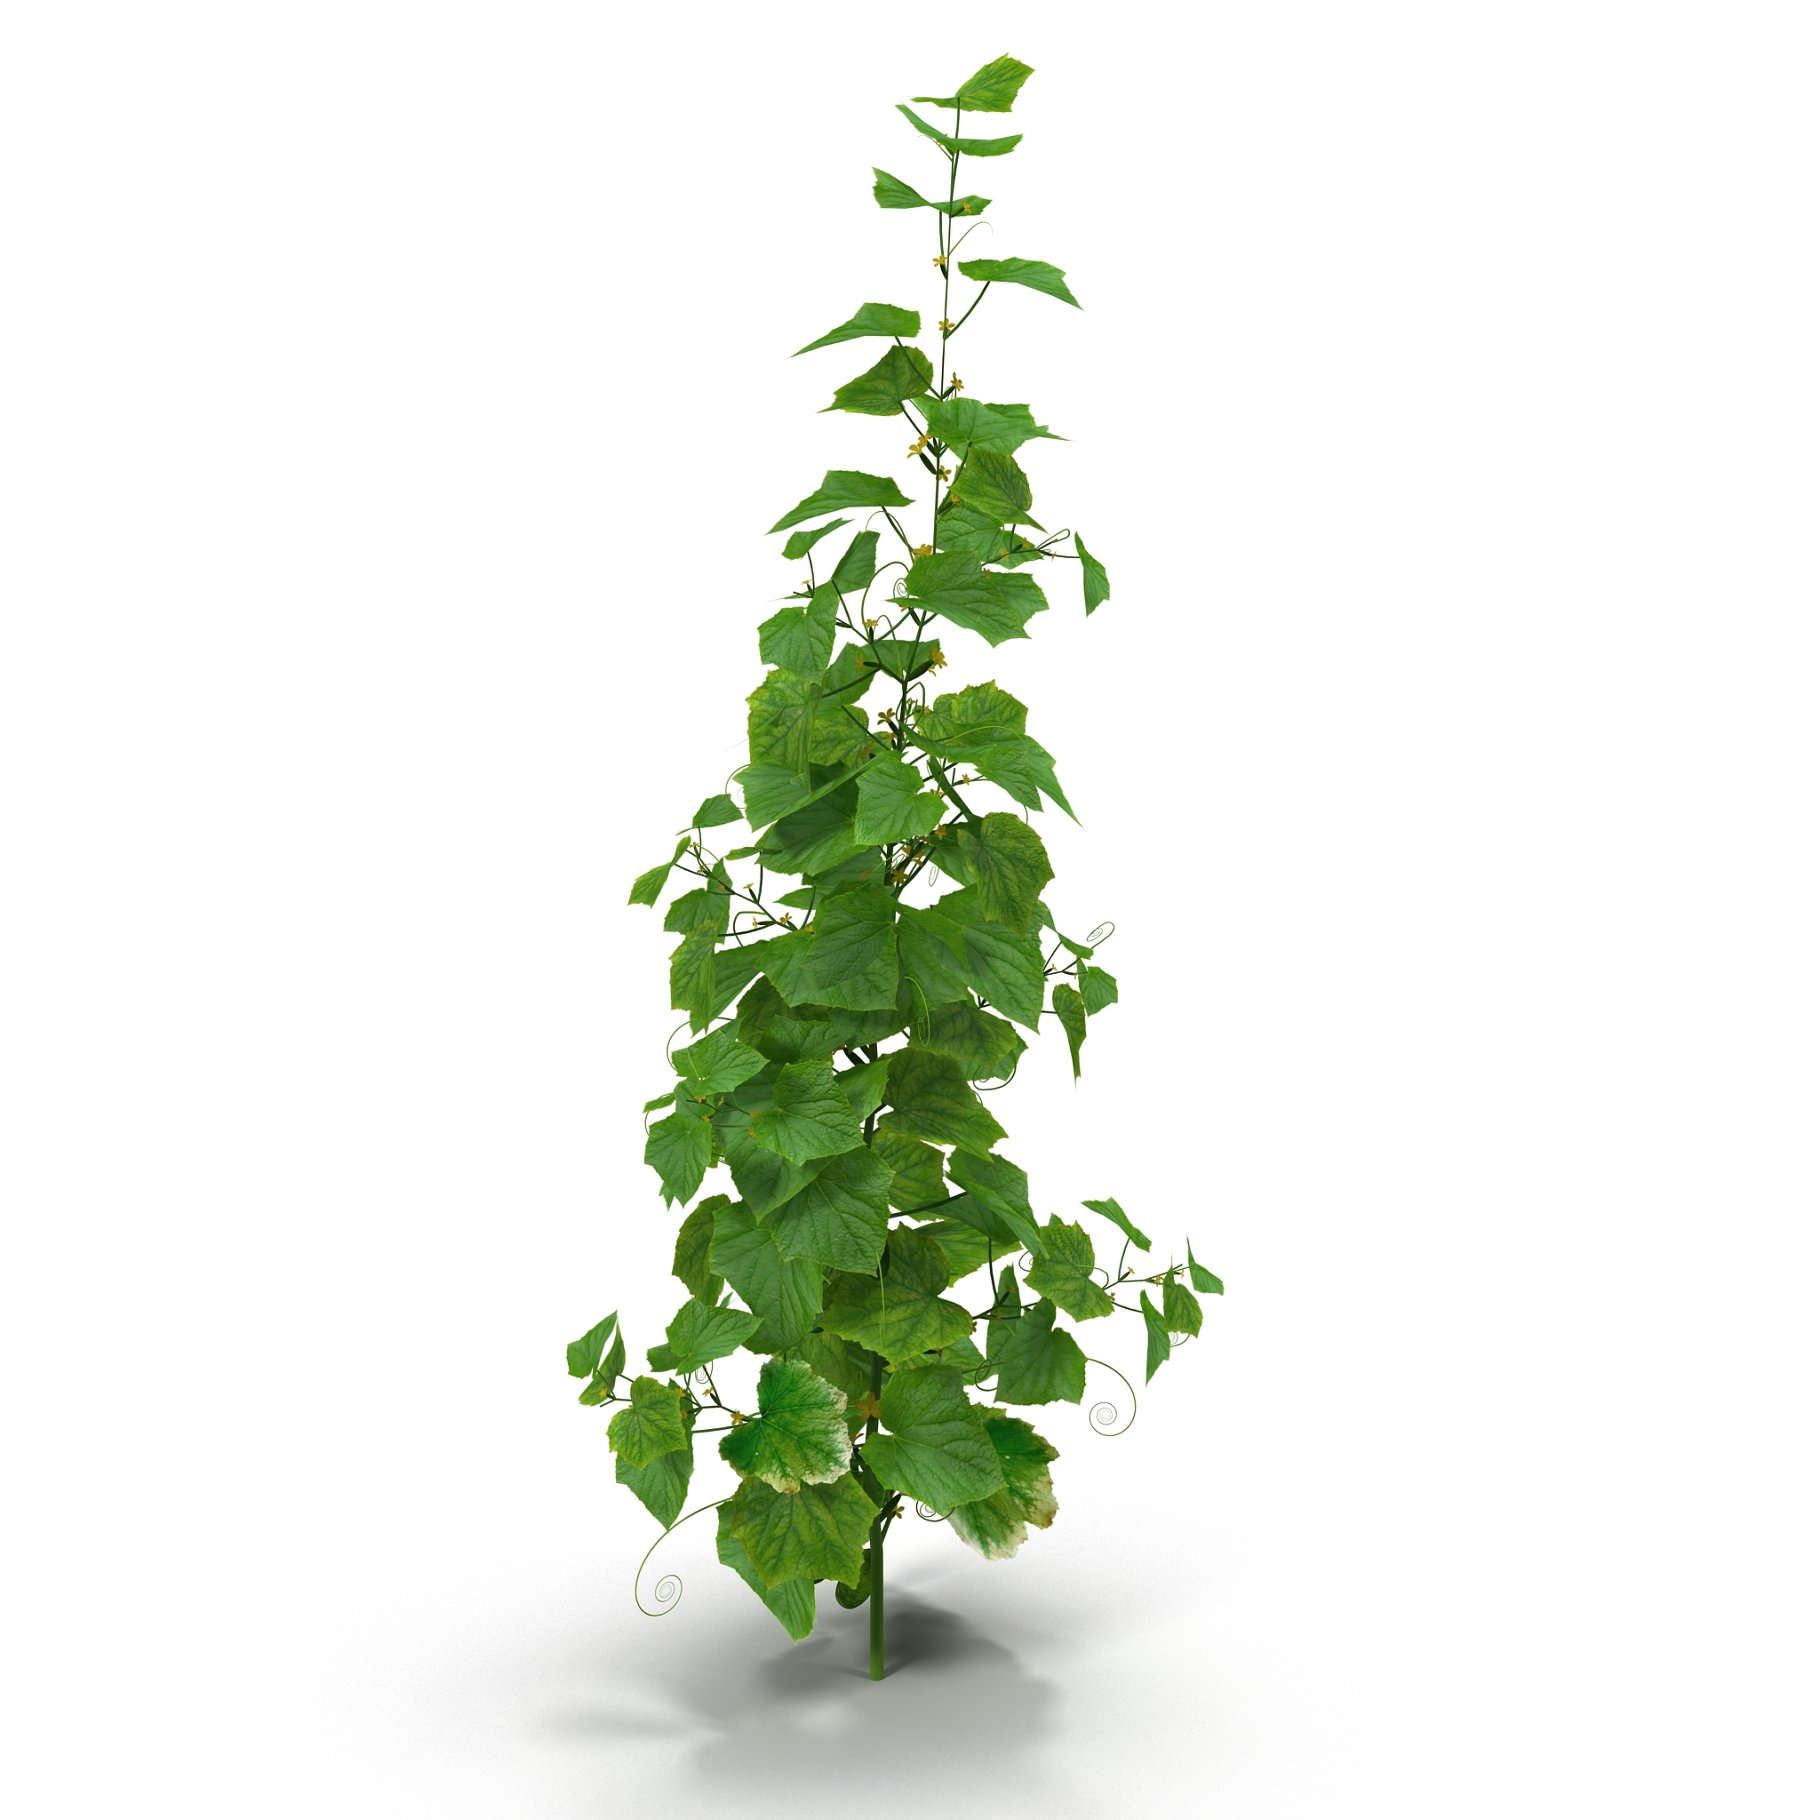 Image of a green plant.